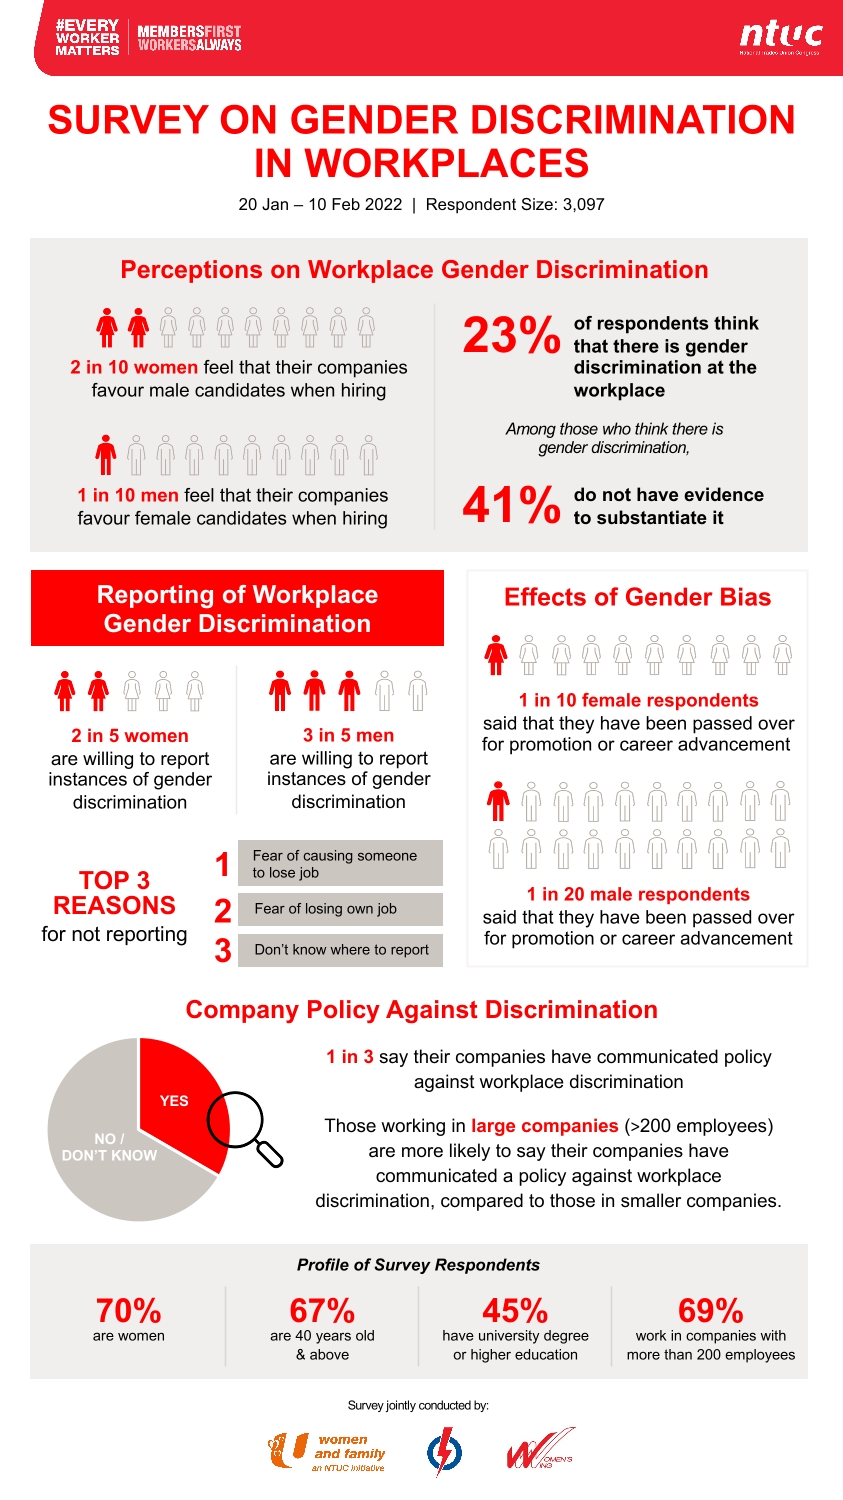 UWomenAndFamily_Annex A - Infographic for Key Findings of Survey on Gender Discrimination-1.jpg